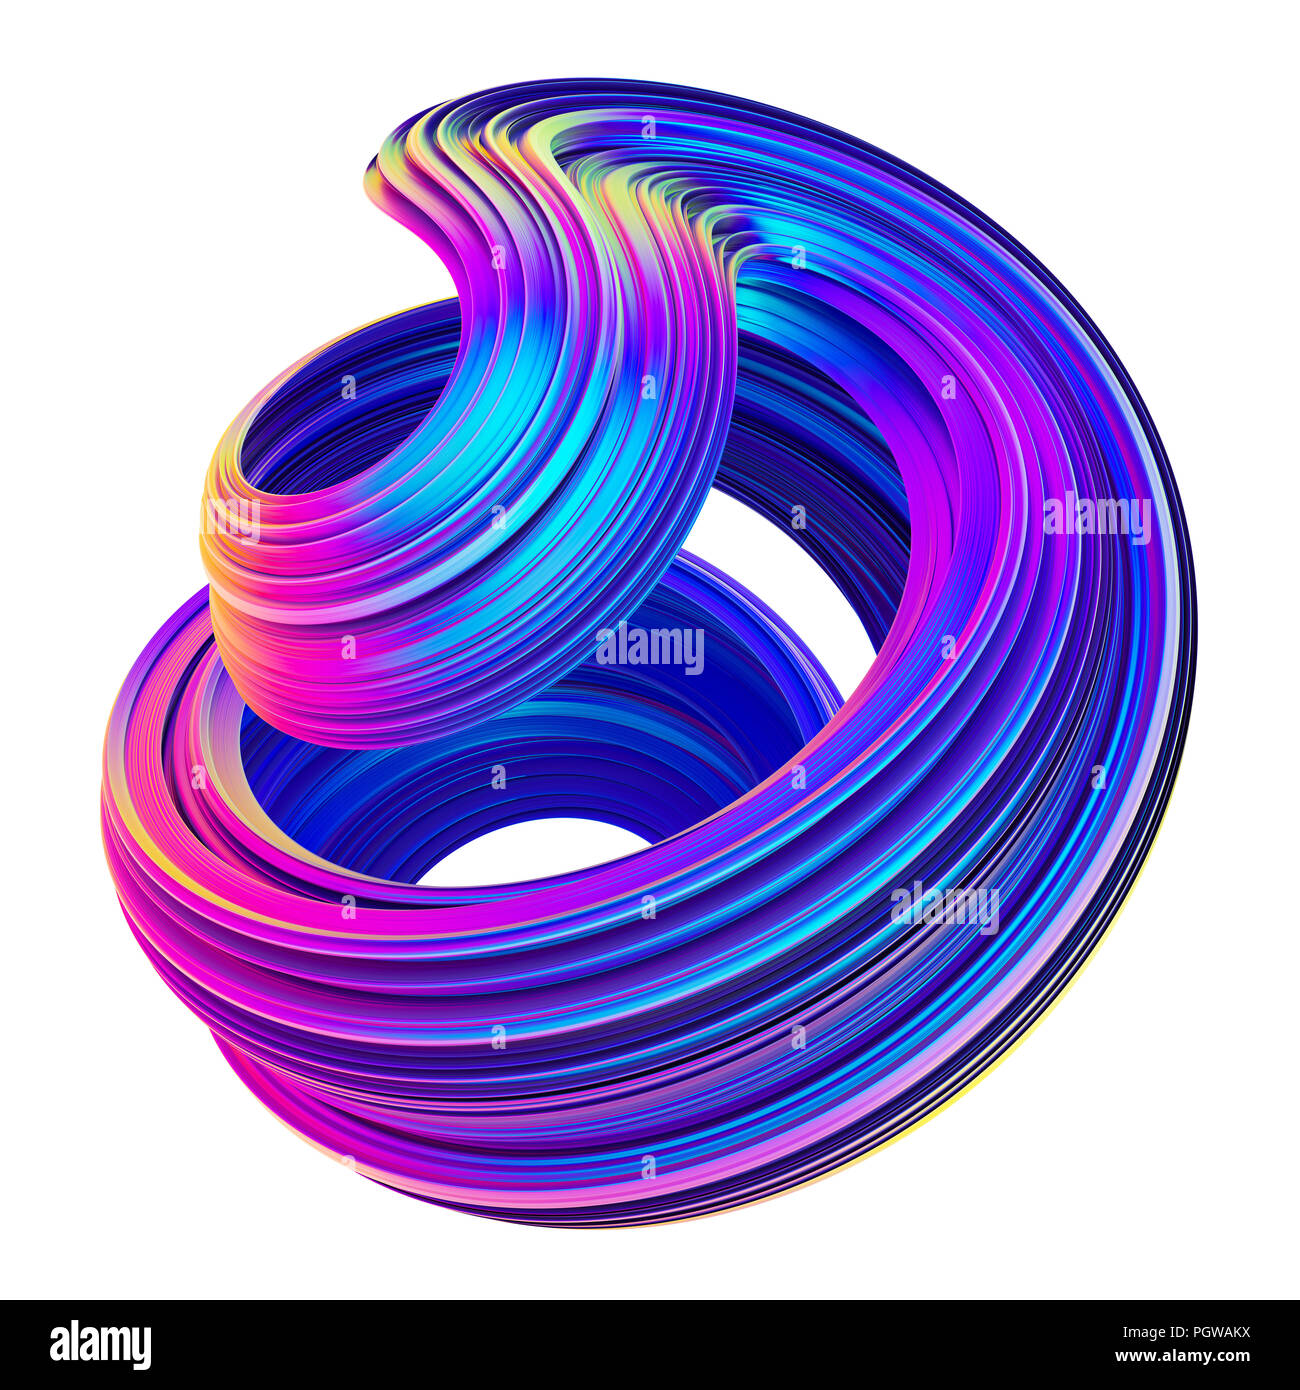 Abstract metallic holographic colored 3D fluid twisted shape. Stock Photo